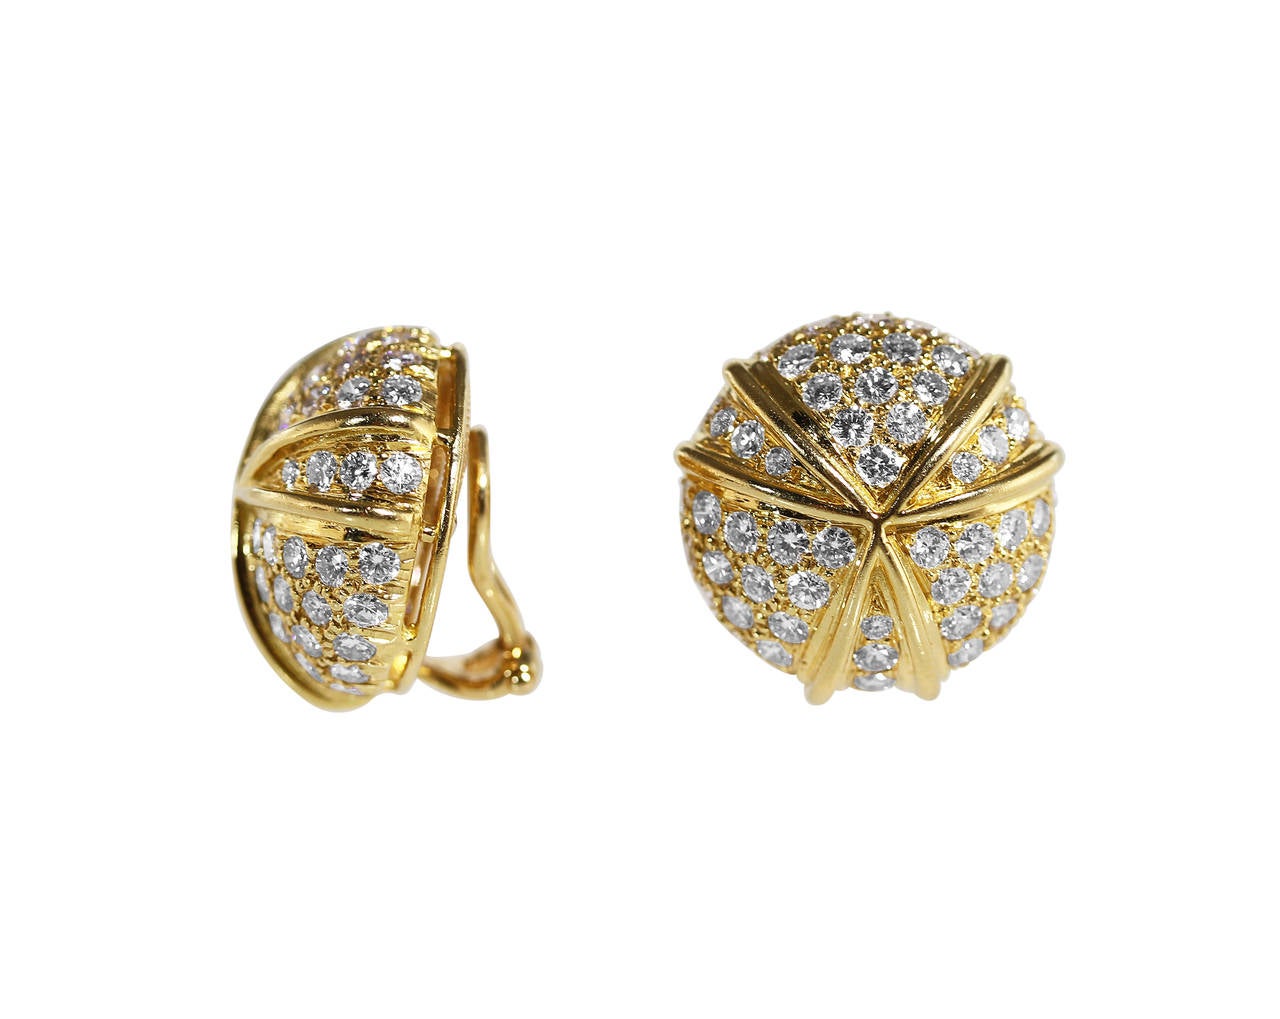 A pair of 18 karat gold and diamond earclips by Harry Winston, the circular clips of bombe form set with 114 round diamonds weighing approximately 4.50 carats, accented by polished gold crossing tendrils, gross weight 18.1 grams, measuring 3/4 by